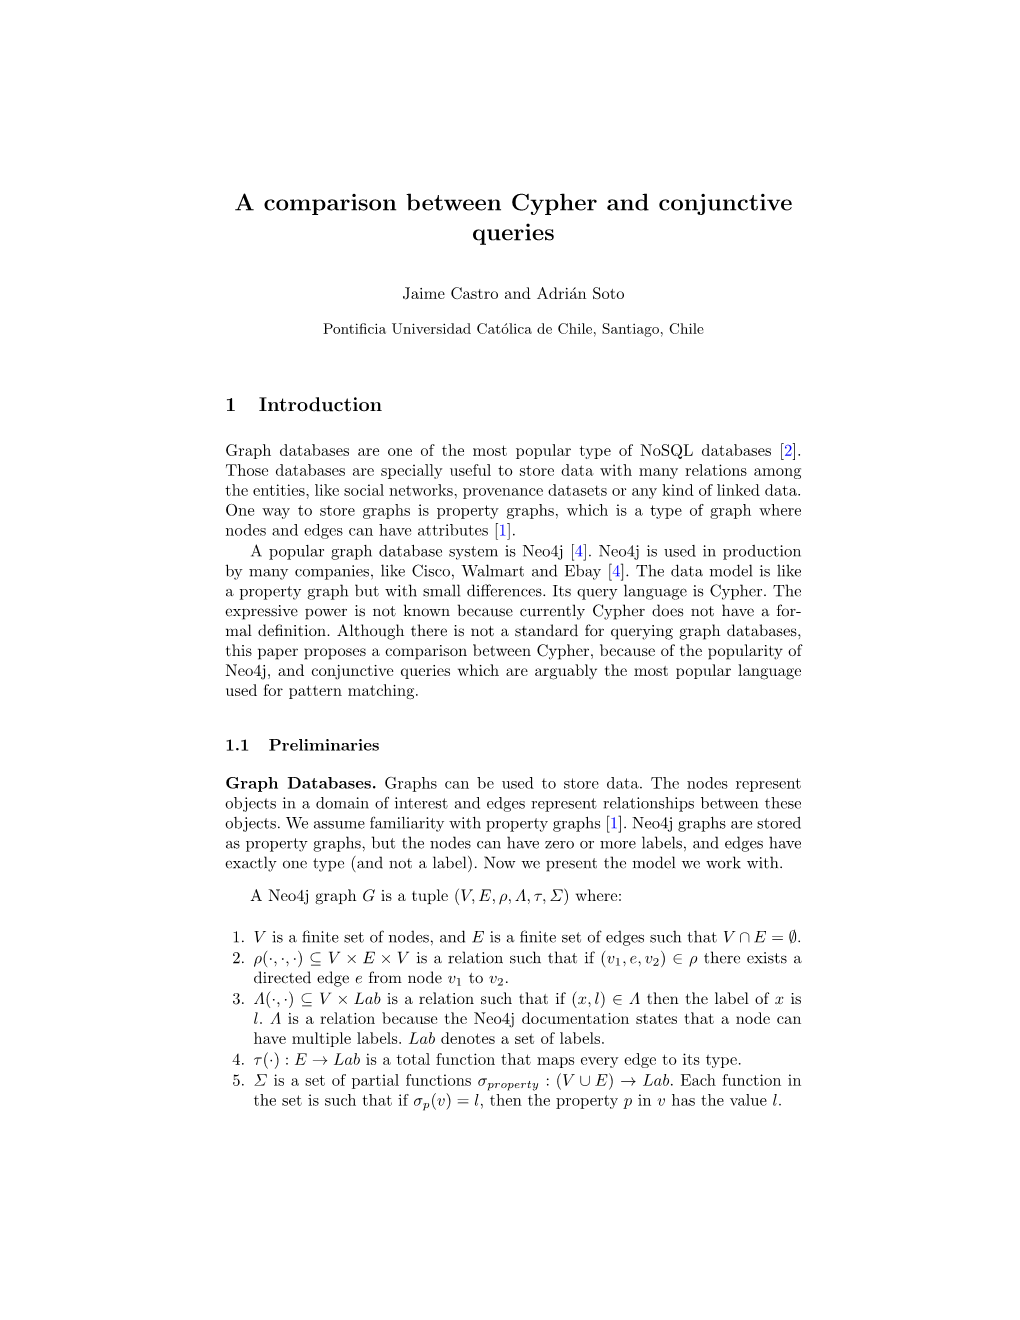 A Comparison Between Cypher and Conjunctive Queries